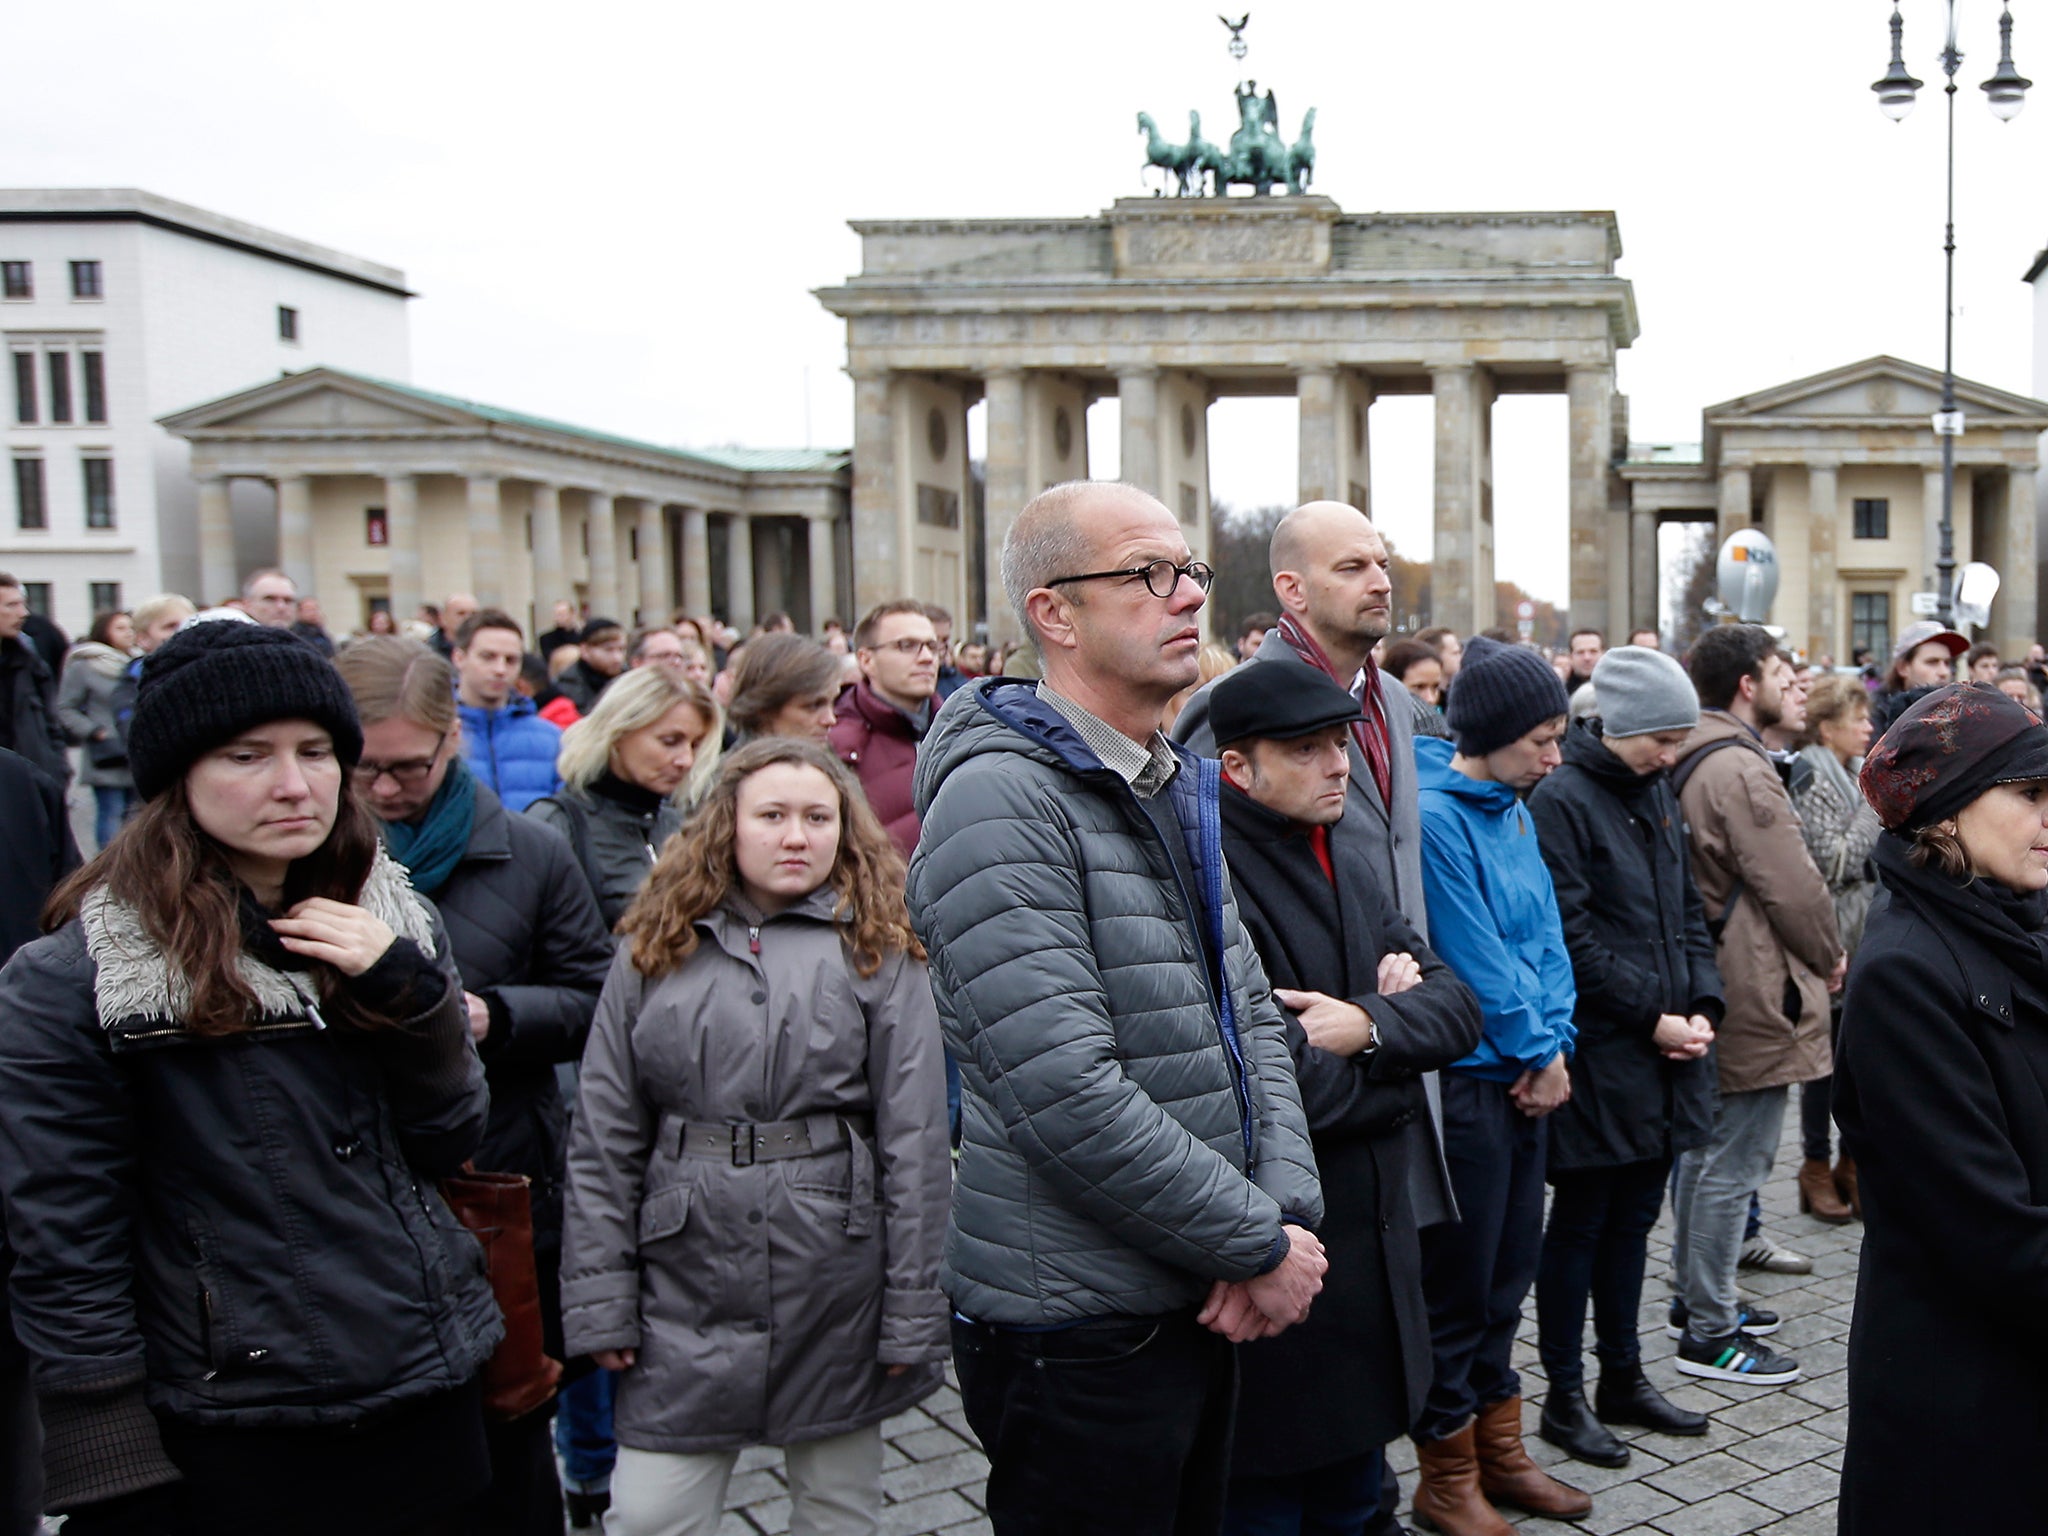 People stand still during a minute of silence at the Brandenburg Gate in Berlin, to honor the victims of the terrorist attacks in France